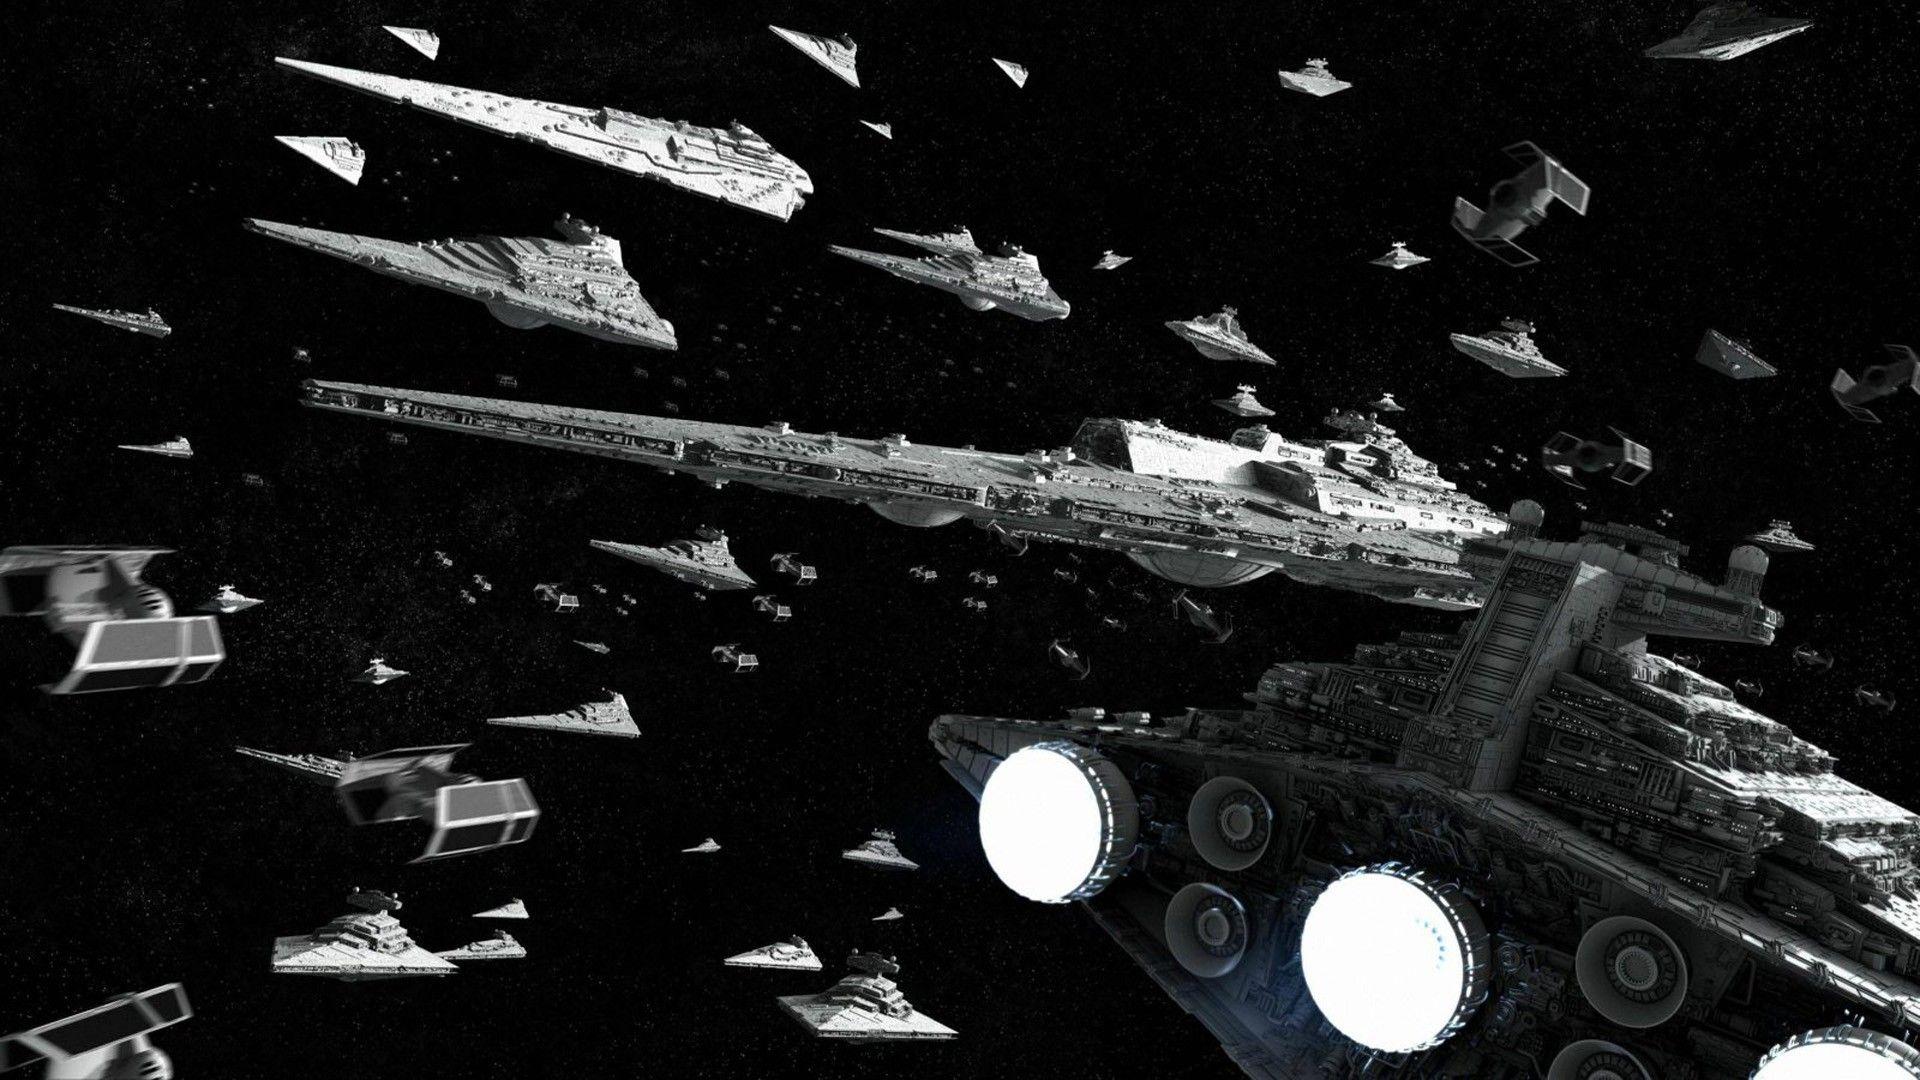 Star Wars, outer space, Galactic Empire, Space ship wallpaper